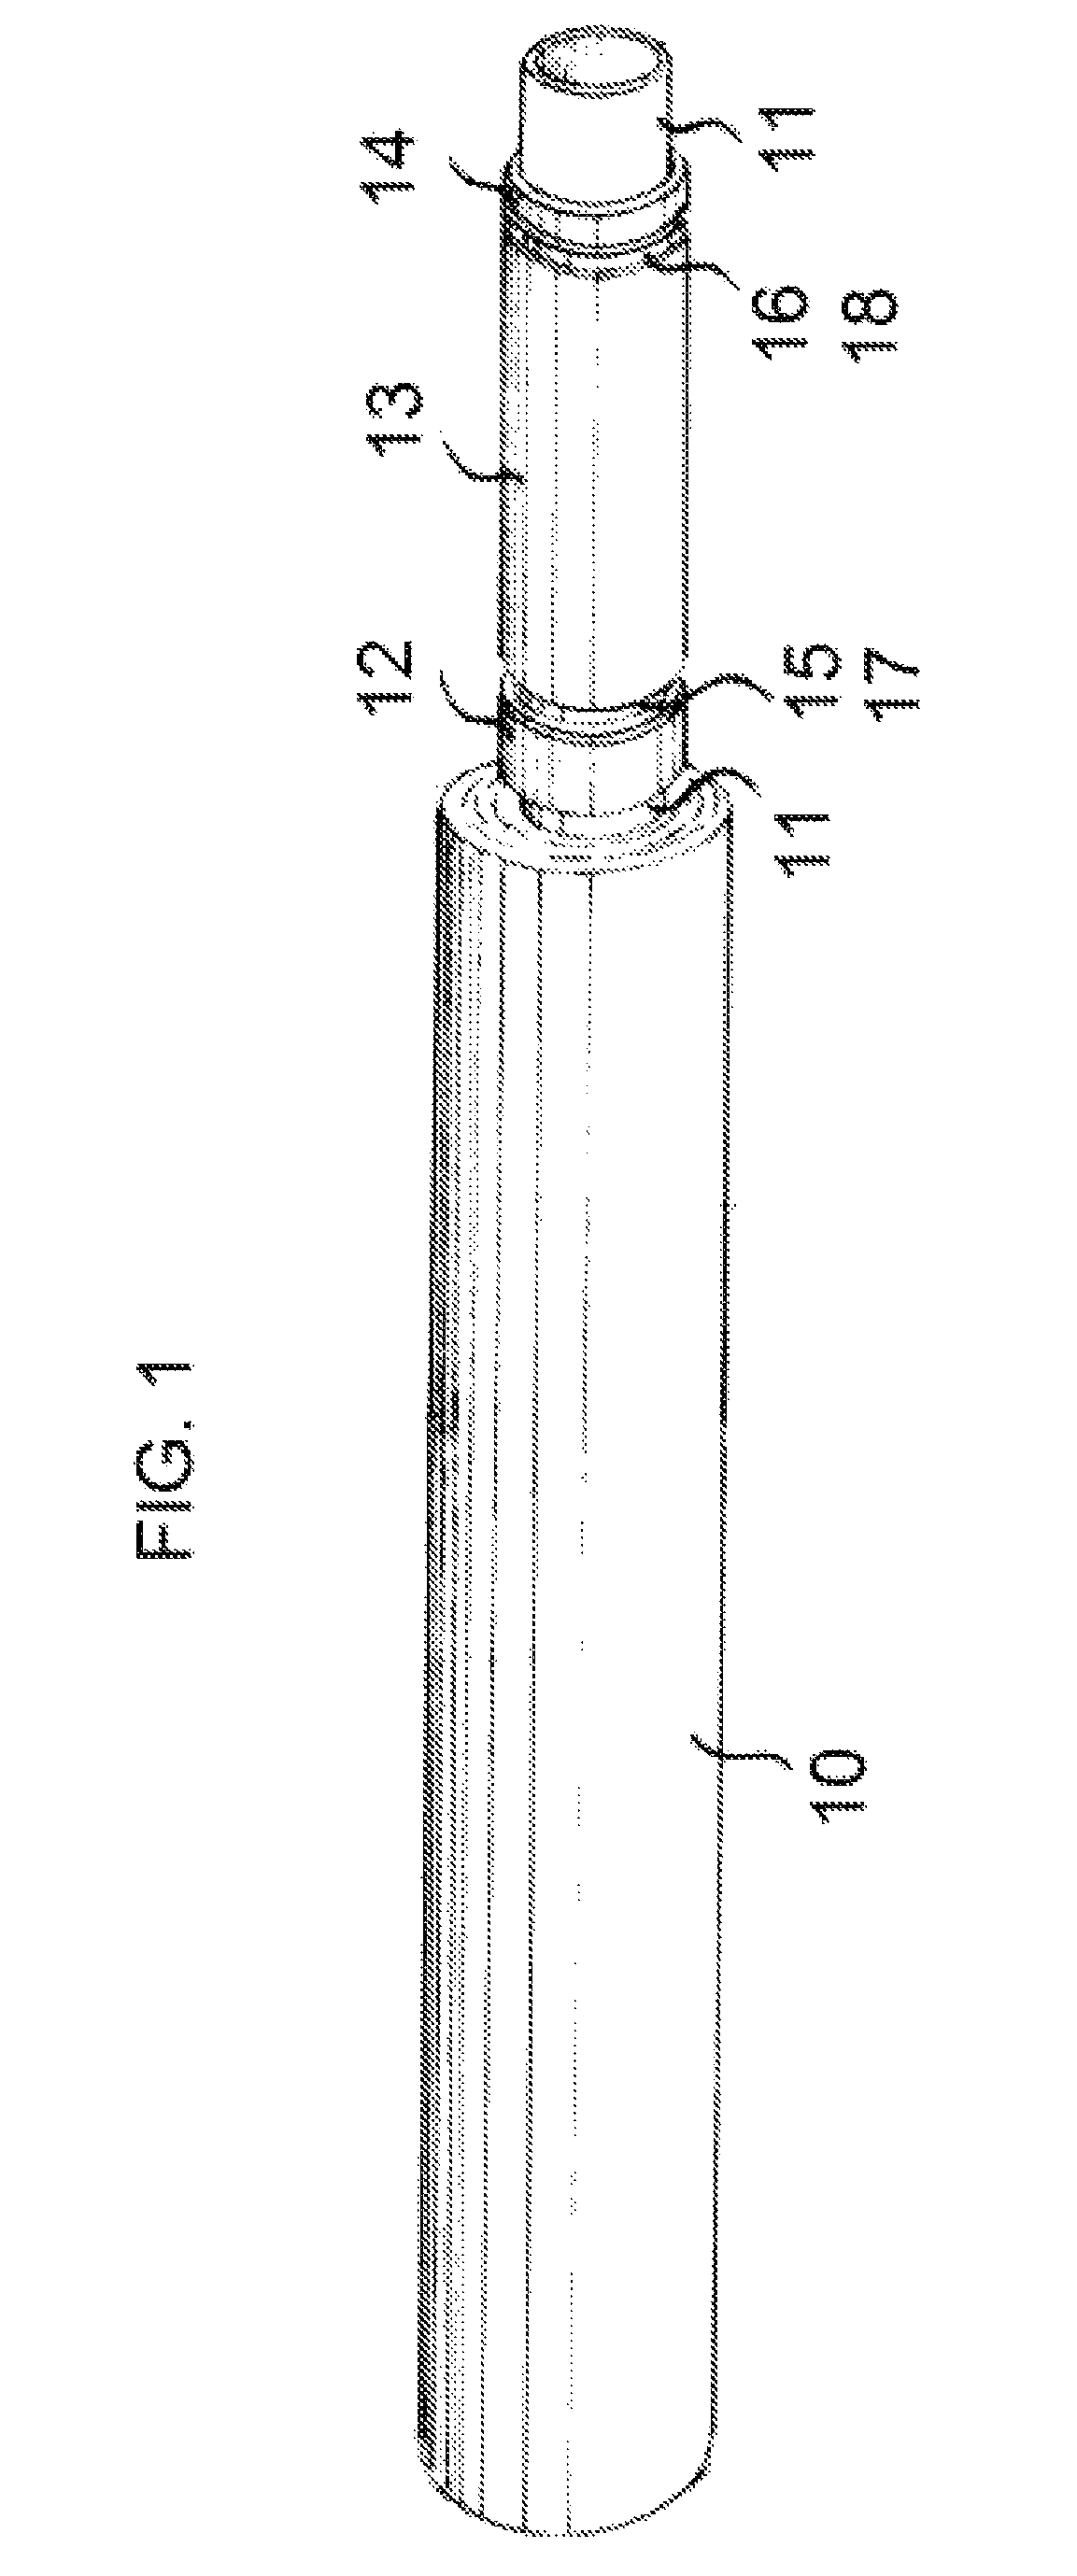 Single-hand self-contained cohesive stretch film baggage wrapping device